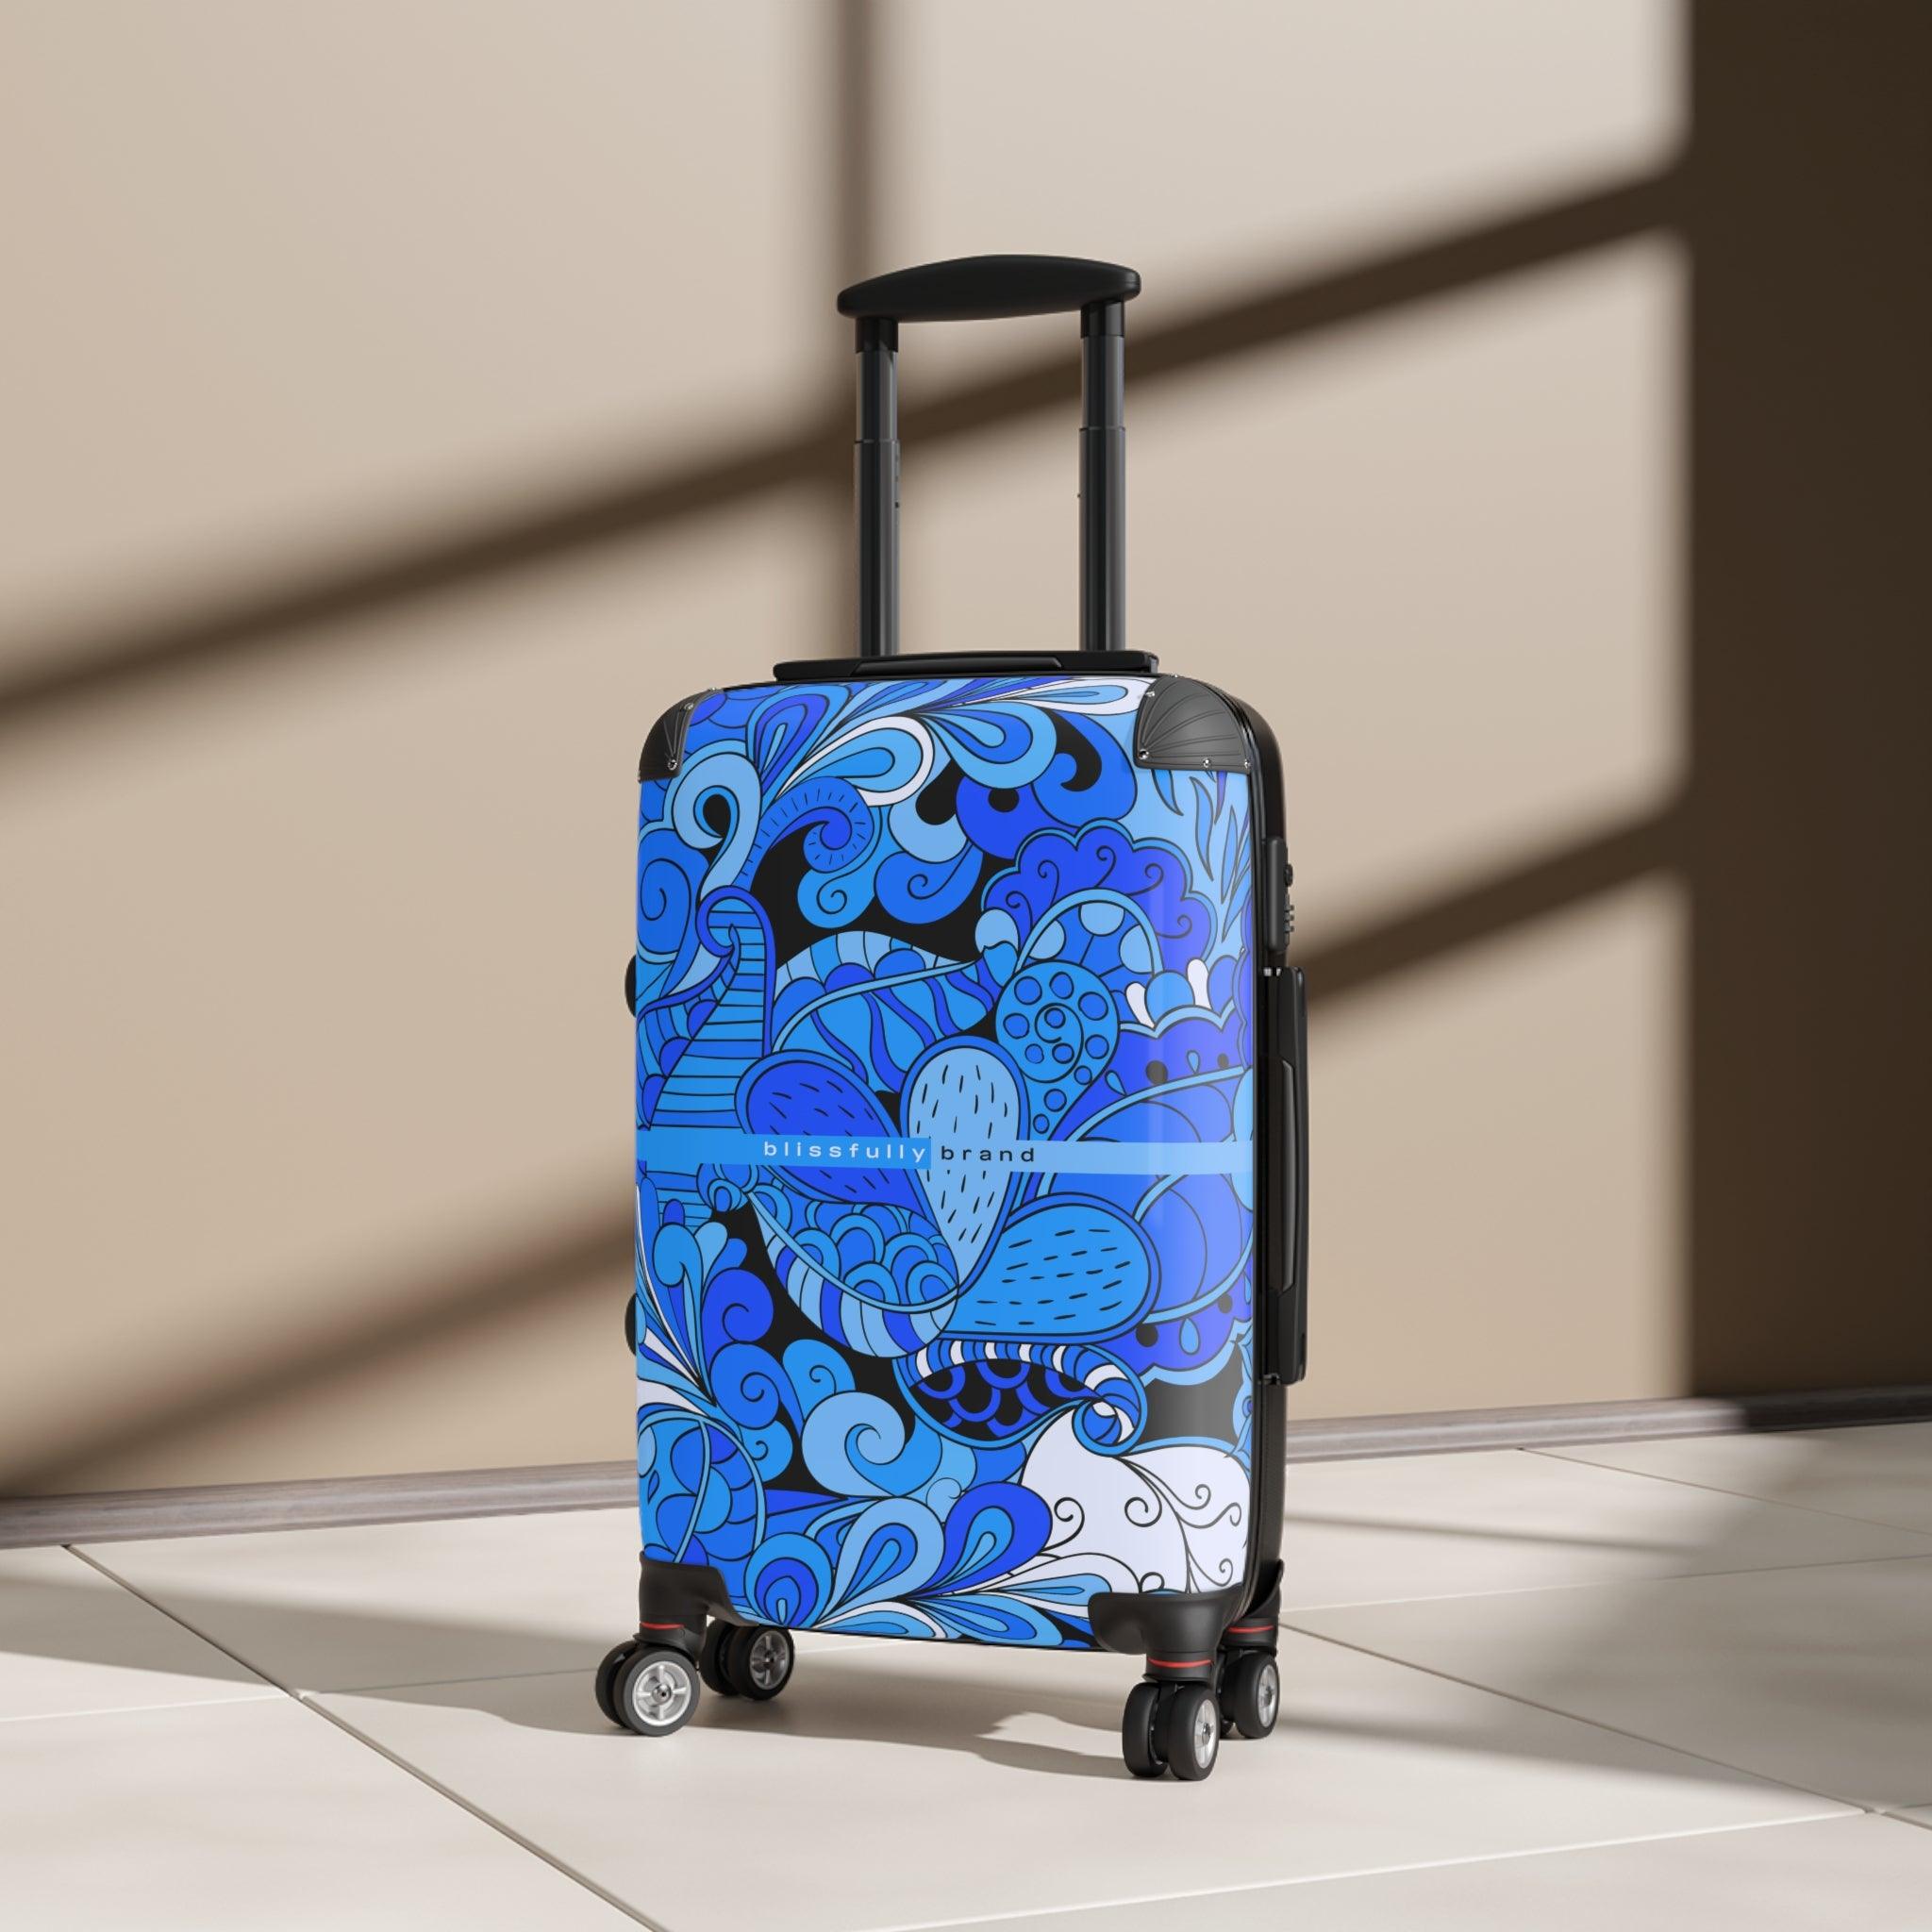 Ima Luggage Collection - Abstract Kaleidoscope Paisley Floral Print Psychedelic Retro Swirls Funky Multicolor Check in Carry On Roller 360 Hard Shell Unique Retro Vibrant Bold Blue